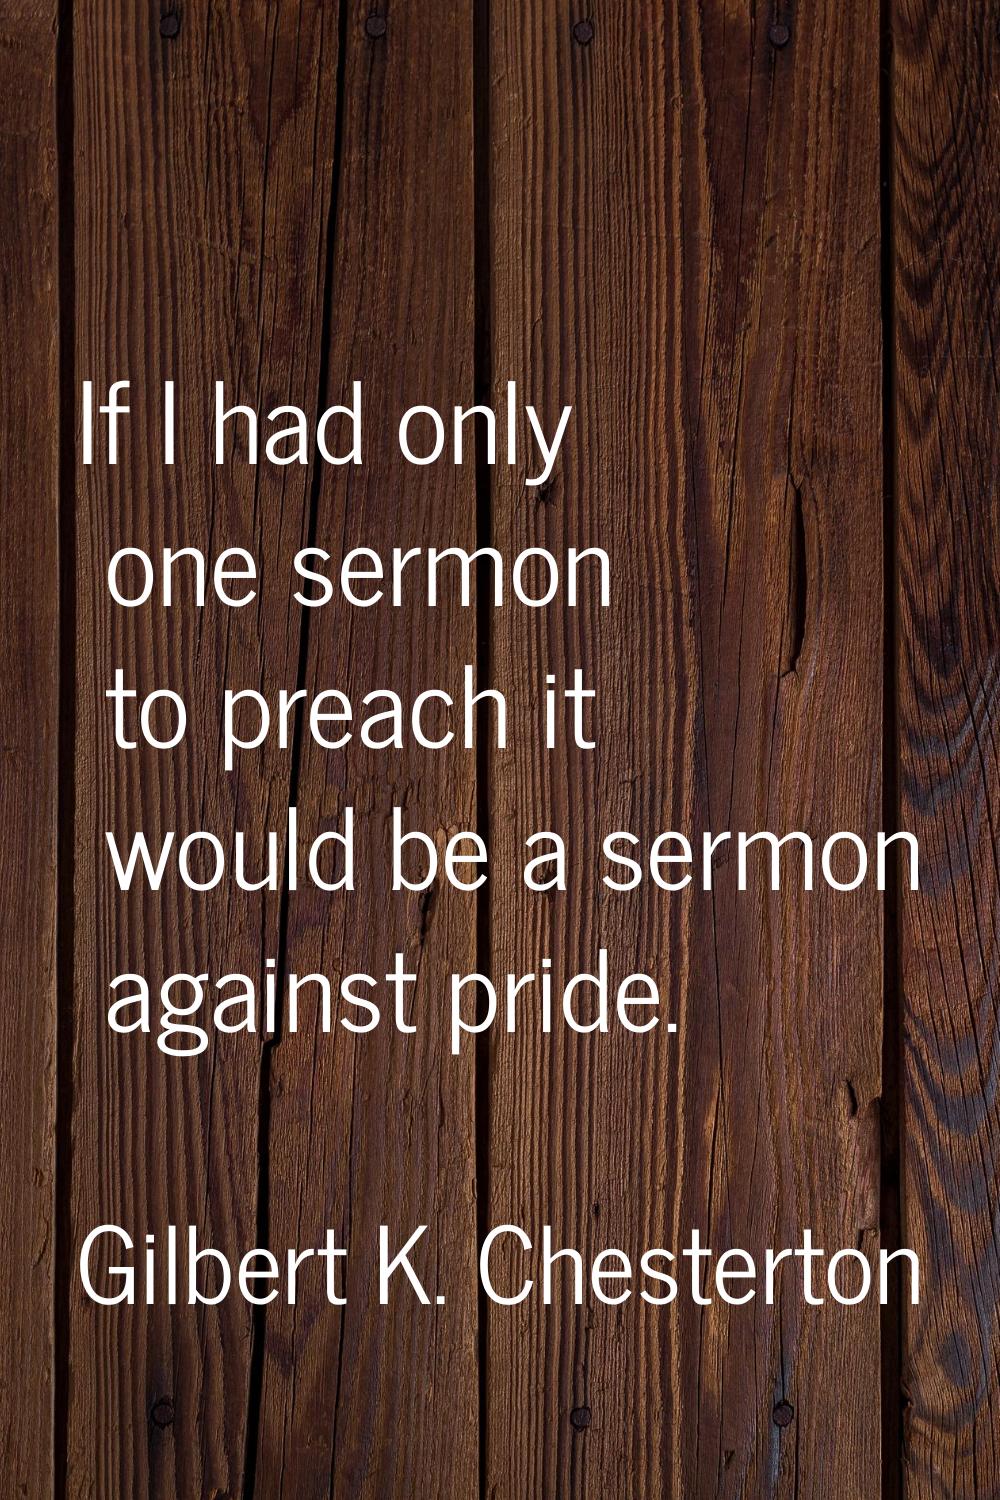 If I had only one sermon to preach it would be a sermon against pride.